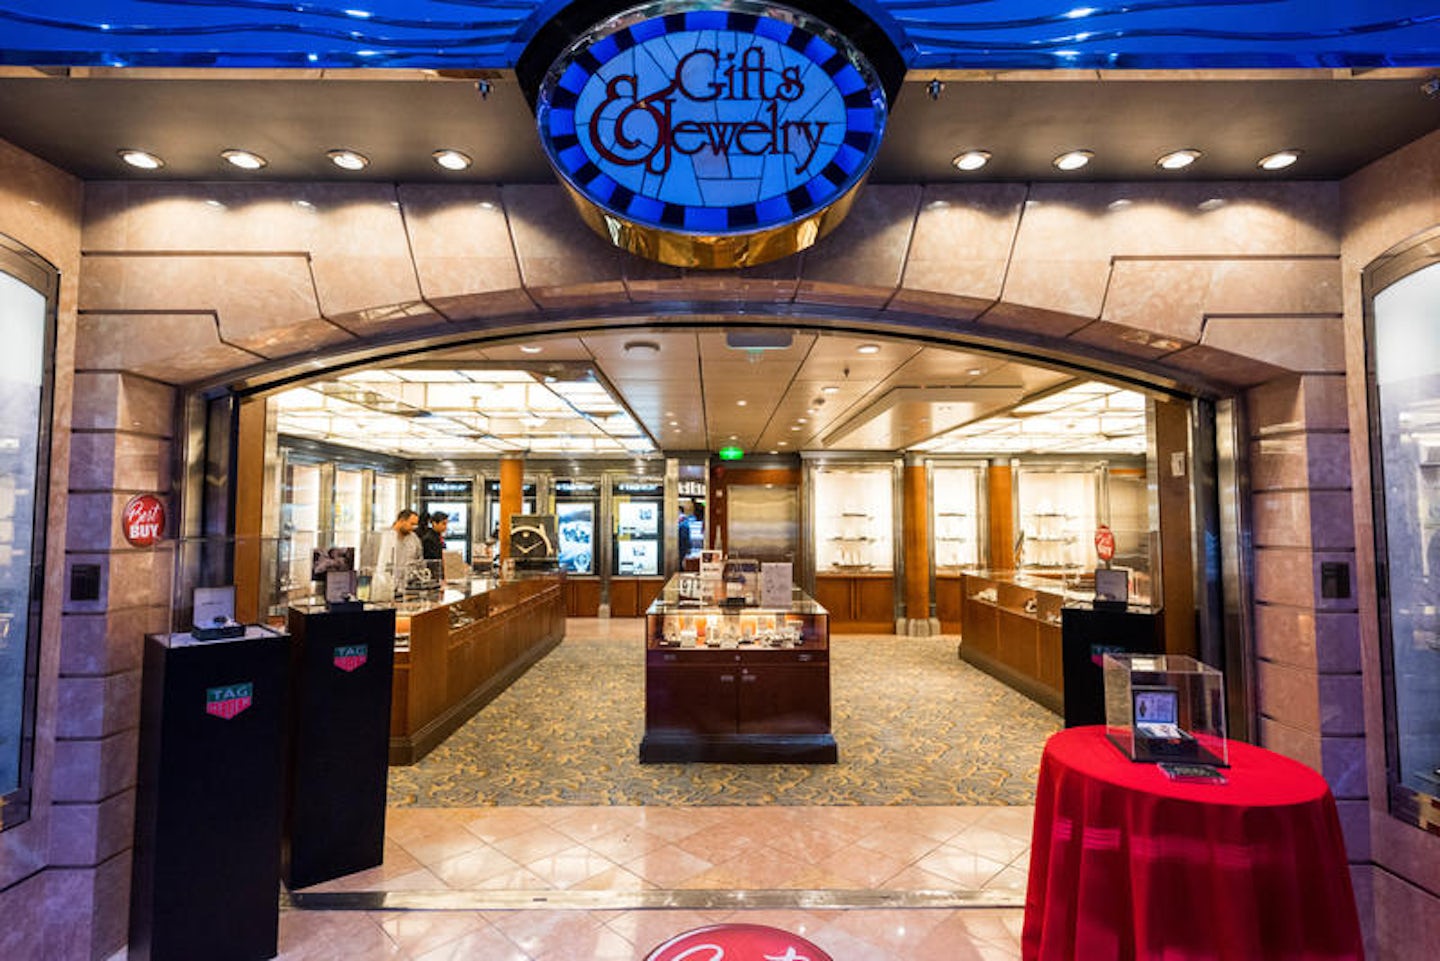 Shops on Adventure of the Seas